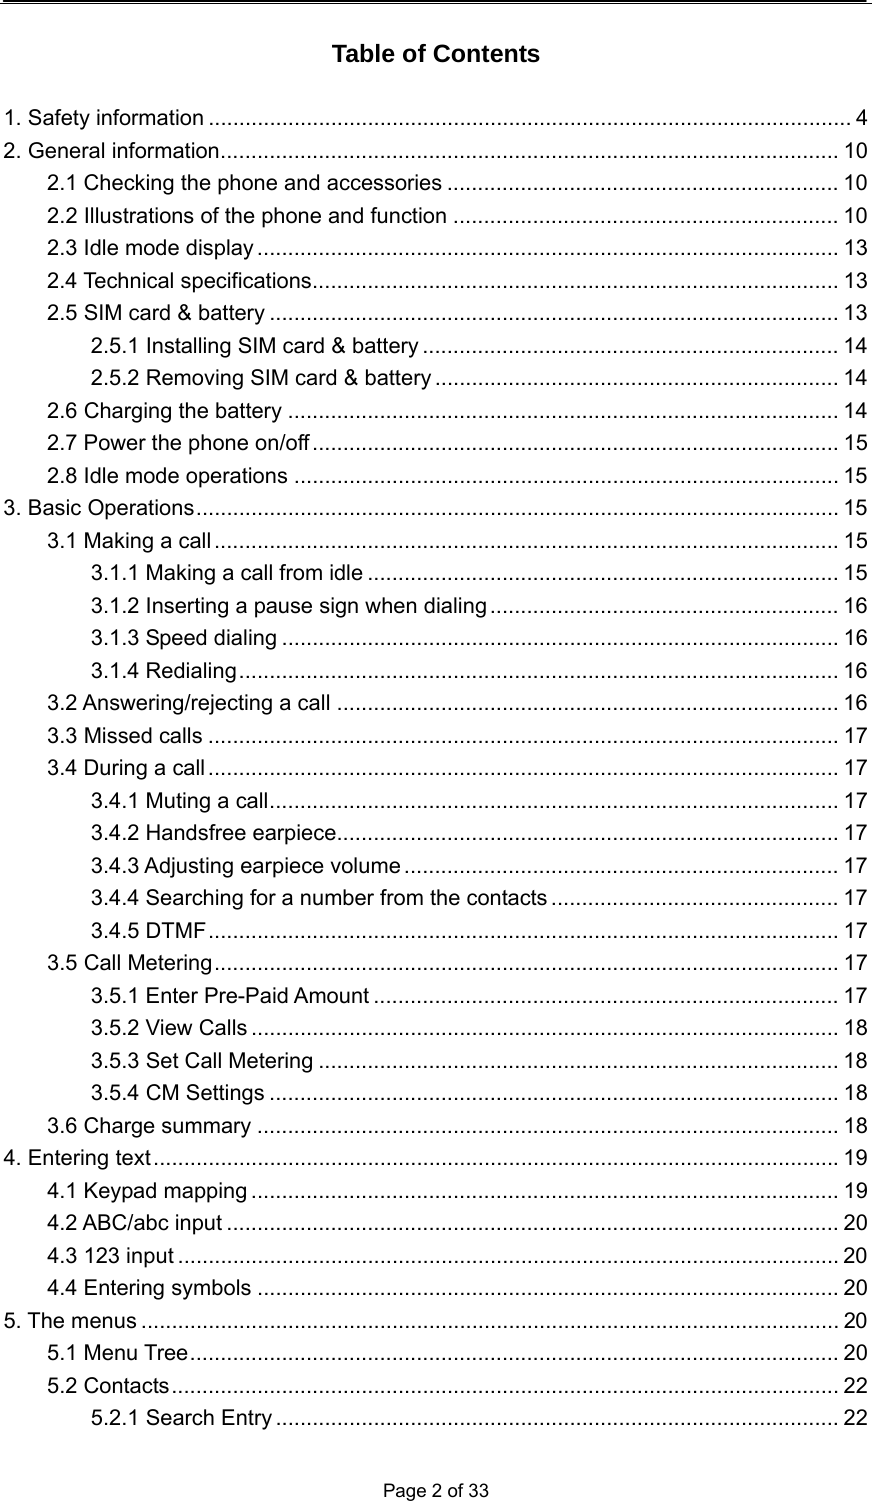  Page 2 of 33  Table of Contents  1. Safety information ......................................................................................................... 4 2. General information..................................................................................................... 10 2.1 Checking the phone and accessories ................................................................ 10 2.2 Illustrations of the phone and function ............................................................... 10 2.3 Idle mode display ............................................................................................... 13 2.4 Technical specifications...................................................................................... 13 2.5 SIM card &amp; battery ............................................................................................. 13 2.5.1 Installing SIM card &amp; battery .................................................................... 14 2.5.2 Removing SIM card &amp; battery .................................................................. 14 2.6 Charging the battery .......................................................................................... 14 2.7 Power the phone on/off...................................................................................... 15 2.8 Idle mode operations ......................................................................................... 15 3. Basic Operations......................................................................................................... 15 3.1 Making a call ...................................................................................................... 15 3.1.1 Making a call from idle ............................................................................. 15 3.1.2 Inserting a pause sign when dialing......................................................... 16 3.1.3 Speed dialing ........................................................................................... 16 3.1.4 Redialing.................................................................................................. 16 3.2 Answering/rejecting a call .................................................................................. 16 3.3 Missed calls ....................................................................................................... 17 3.4 During a call ....................................................................................................... 17 3.4.1 Muting a call............................................................................................. 17 3.4.2 Handsfree earpiece.................................................................................. 17 3.4.3 Adjusting earpiece volume ....................................................................... 17 3.4.4 Searching for a number from the contacts ............................................... 17 3.4.5 DTMF....................................................................................................... 17 3.5 Call Metering...................................................................................................... 17 3.5.1 Enter Pre-Paid Amount ............................................................................ 17 3.5.2 View Calls ................................................................................................ 18 3.5.3 Set Call Metering ..................................................................................... 18 3.5.4 CM Settings ............................................................................................. 18 3.6 Charge summary ............................................................................................... 18 4. Entering text................................................................................................................ 19 4.1 Keypad mapping ................................................................................................ 19 4.2 ABC/abc input .................................................................................................... 20 4.3 123 input ............................................................................................................ 20 4.4 Entering symbols ............................................................................................... 20 5. The menus .................................................................................................................. 20 5.1 Menu Tree.......................................................................................................... 20 5.2 Contacts............................................................................................................. 22 5.2.1 Search Entry ............................................................................................ 22 